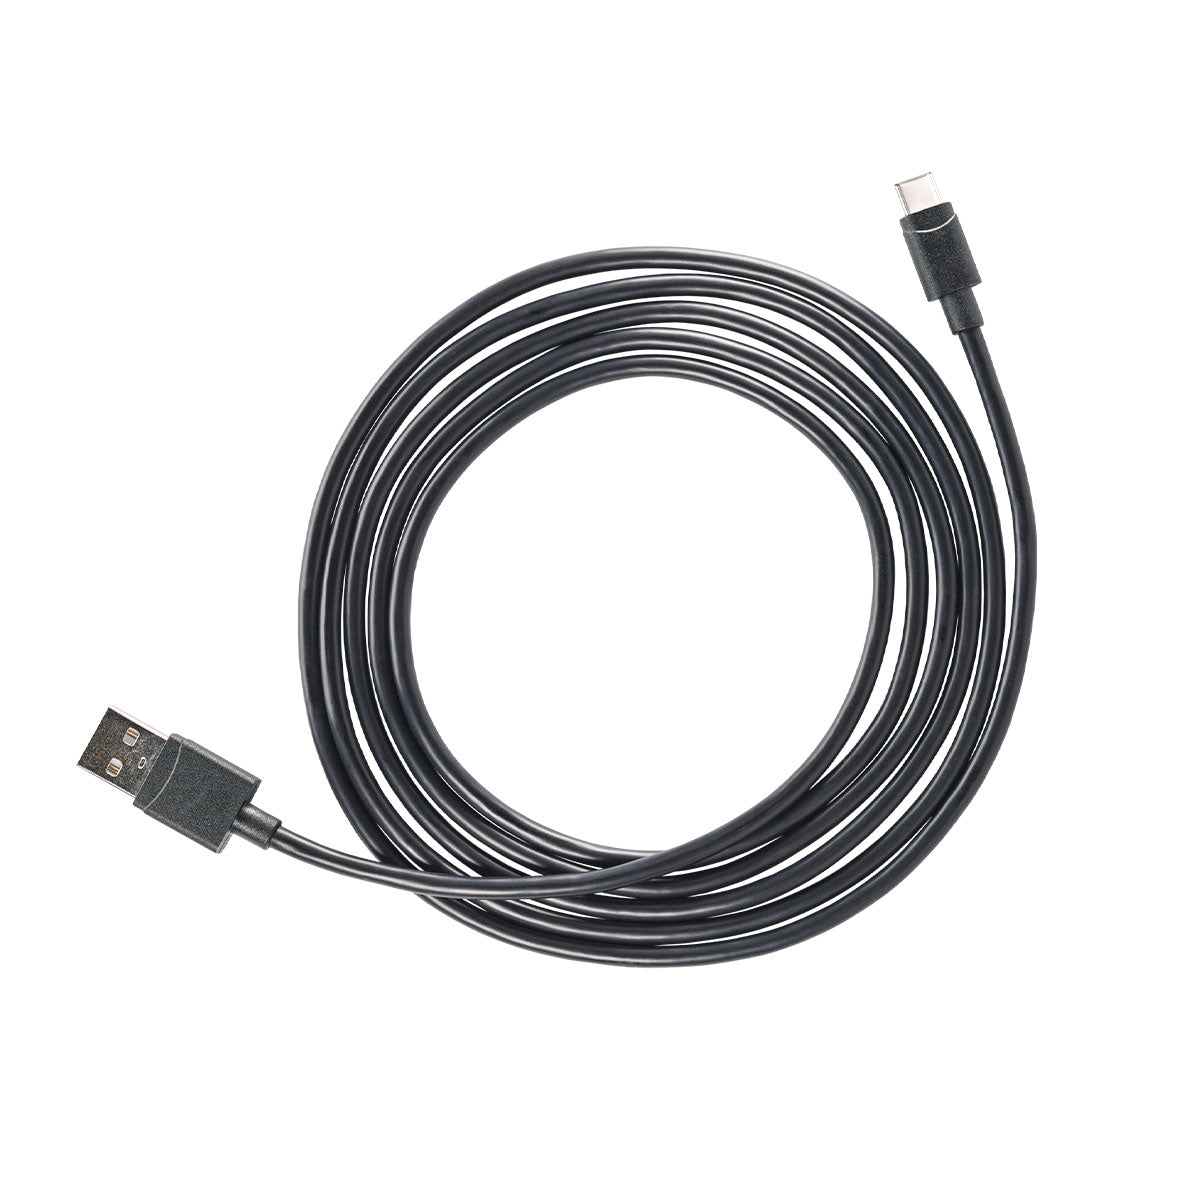 Essentials By Ventev USB A To USB C 2.0 Cable 6Ft - Black